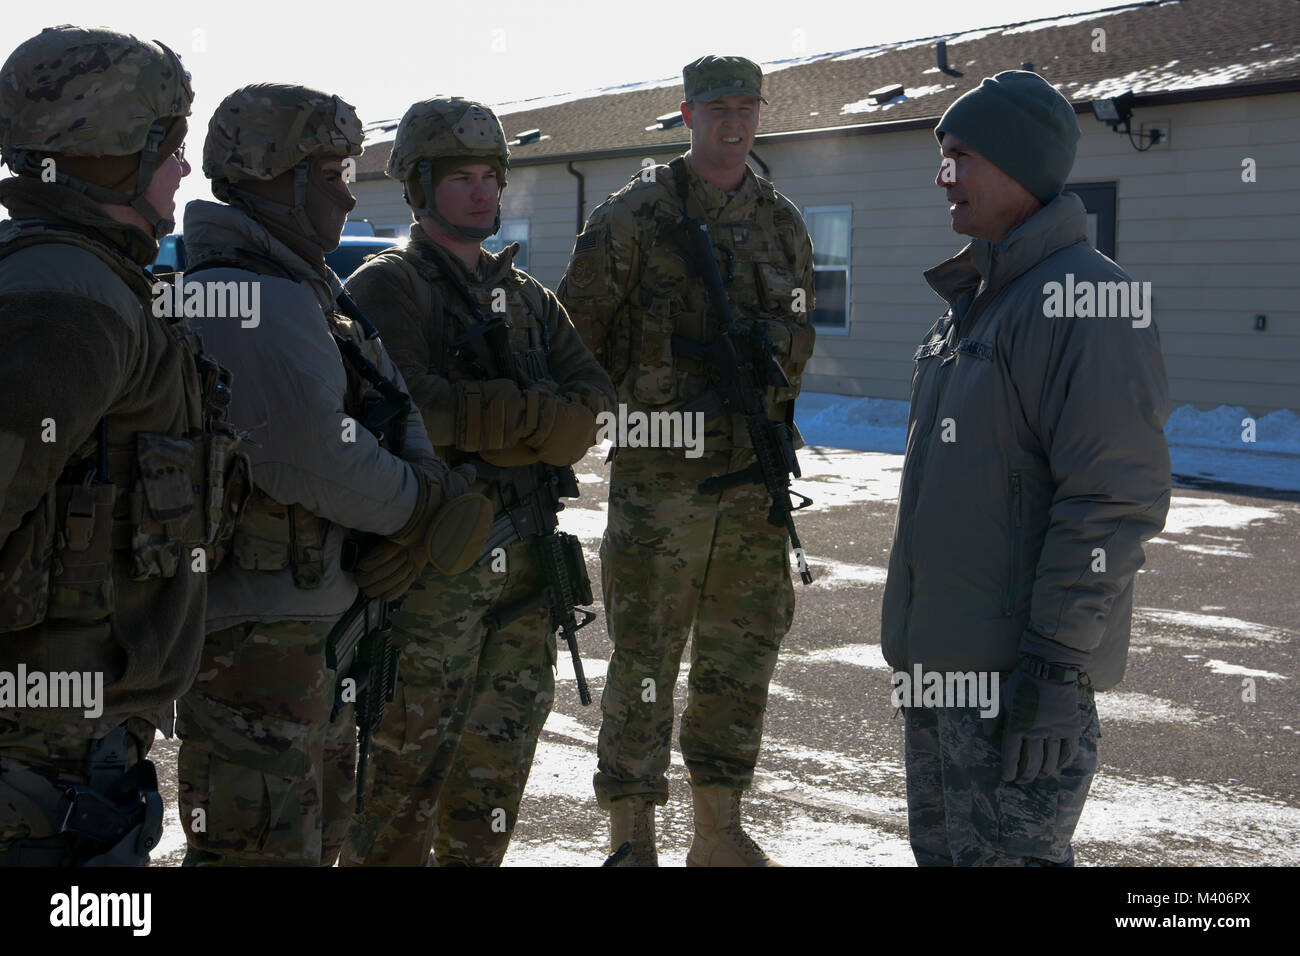 Brig. Gen. Paul Tibbets IV, Air Force Global Strike Command deputy commander, speaks with 91st Security Forces Group Airmen at a missile alert facility near Mohall, N.D., Feb. 7, 2018. During the interaction, Tibbets discussed upgrades to security forces vehicles, weaponry and other protective gear. (U.S Air Force photo by Staff Sgt. Sahara L. Fales) Stock Photo